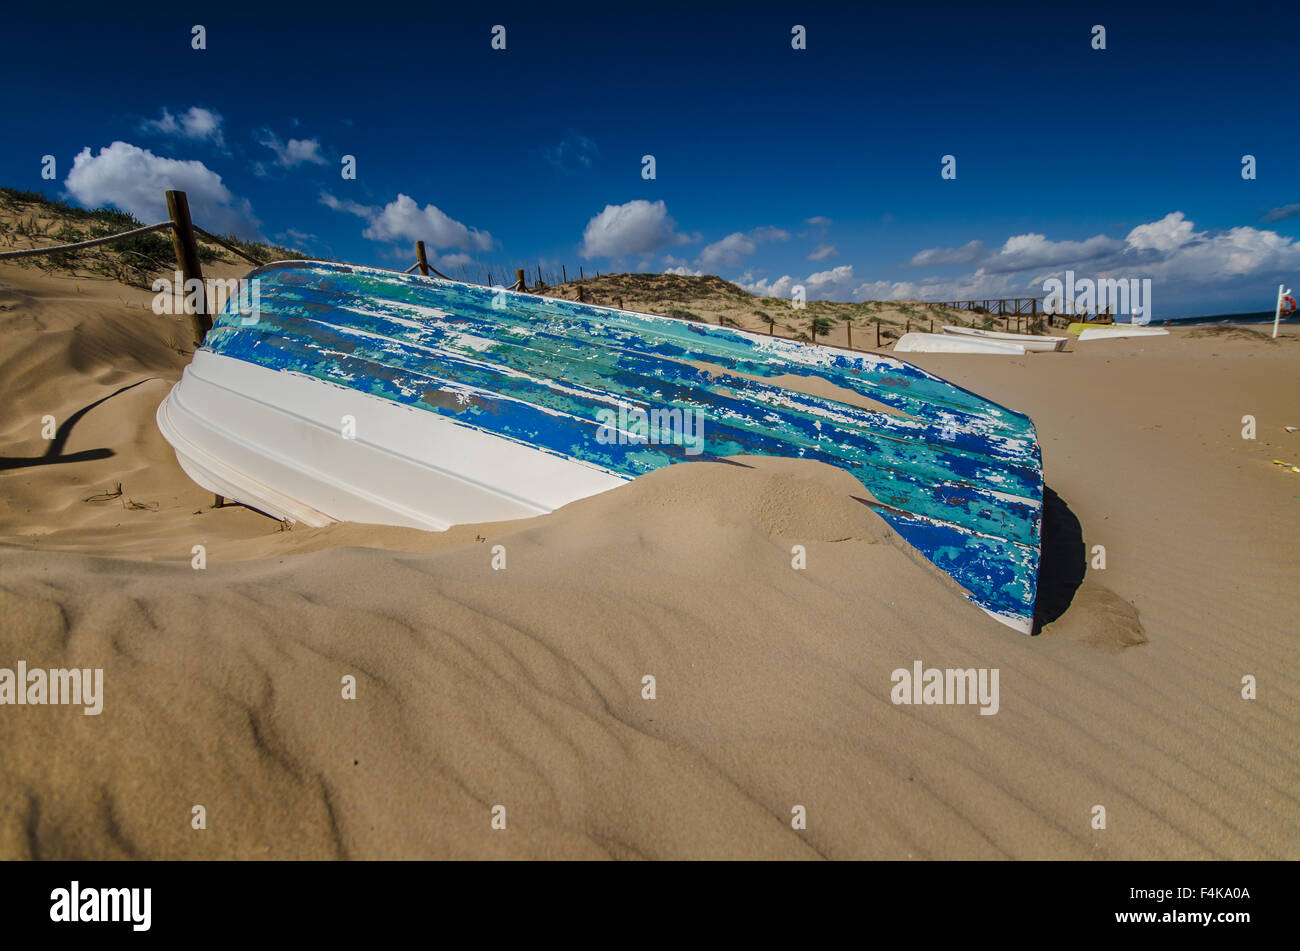 Upturned boat on beach in Guardamar, province of Alicante located at the mouth of the river Segura on the Mediterranean Sea, Costa Blanca, The Med Stock Photo